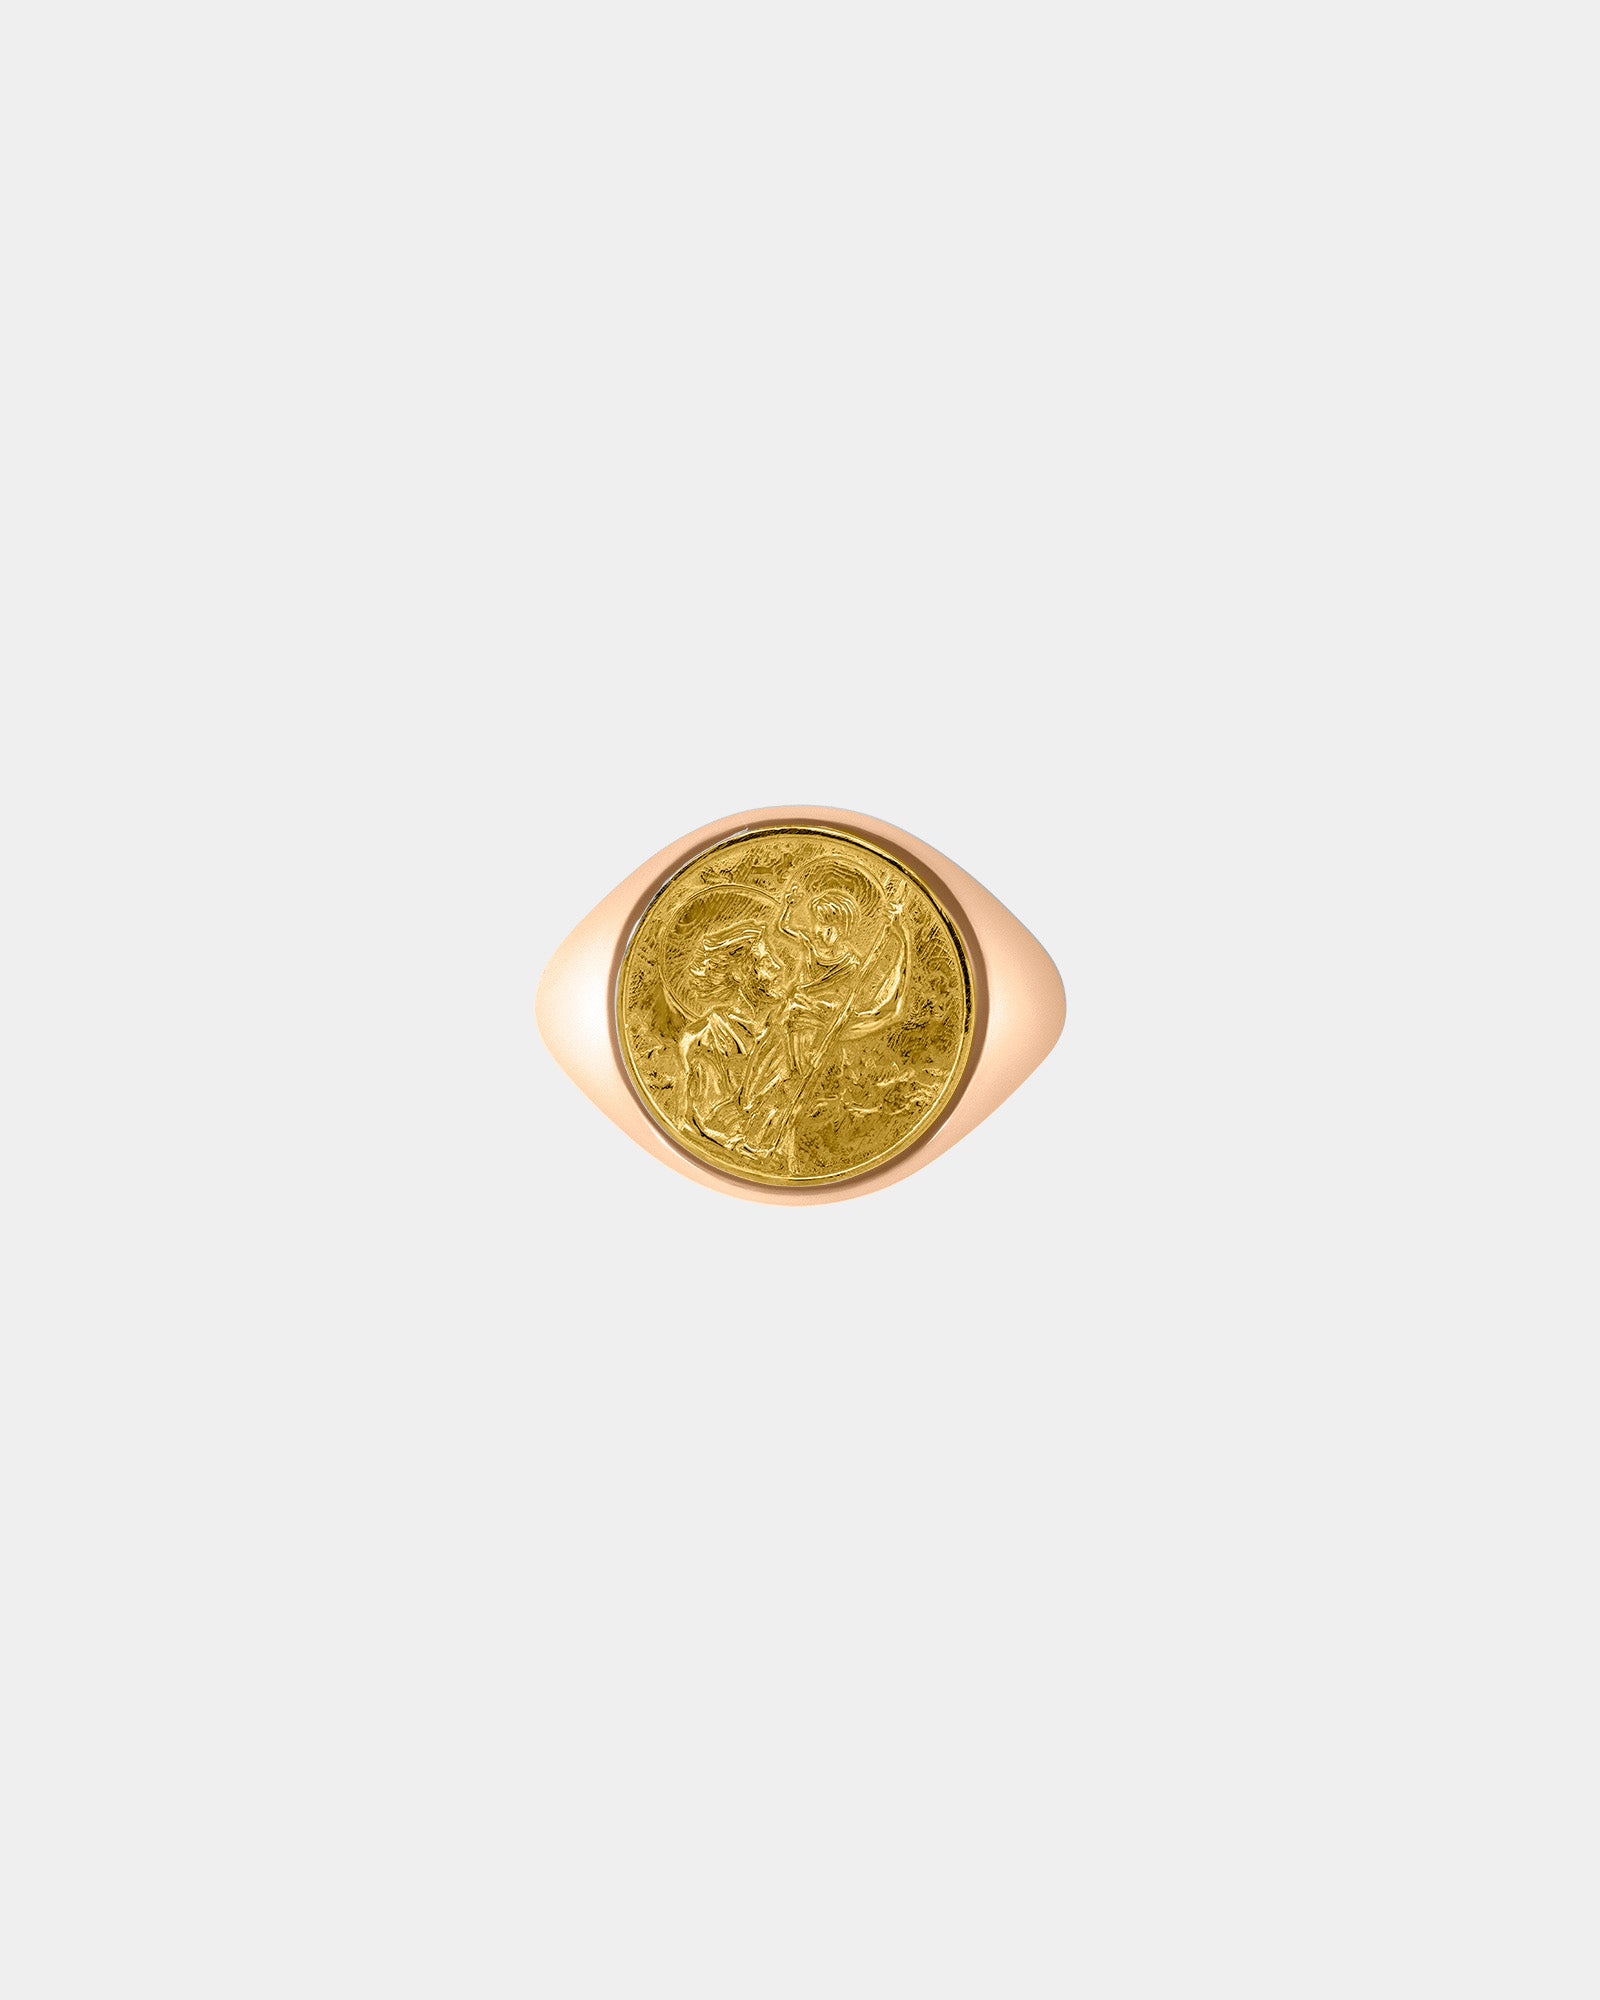 Large Saint Christopher Signet Ring in 9k Rose Gold / 9k Yellow Gold by Wilson Grant